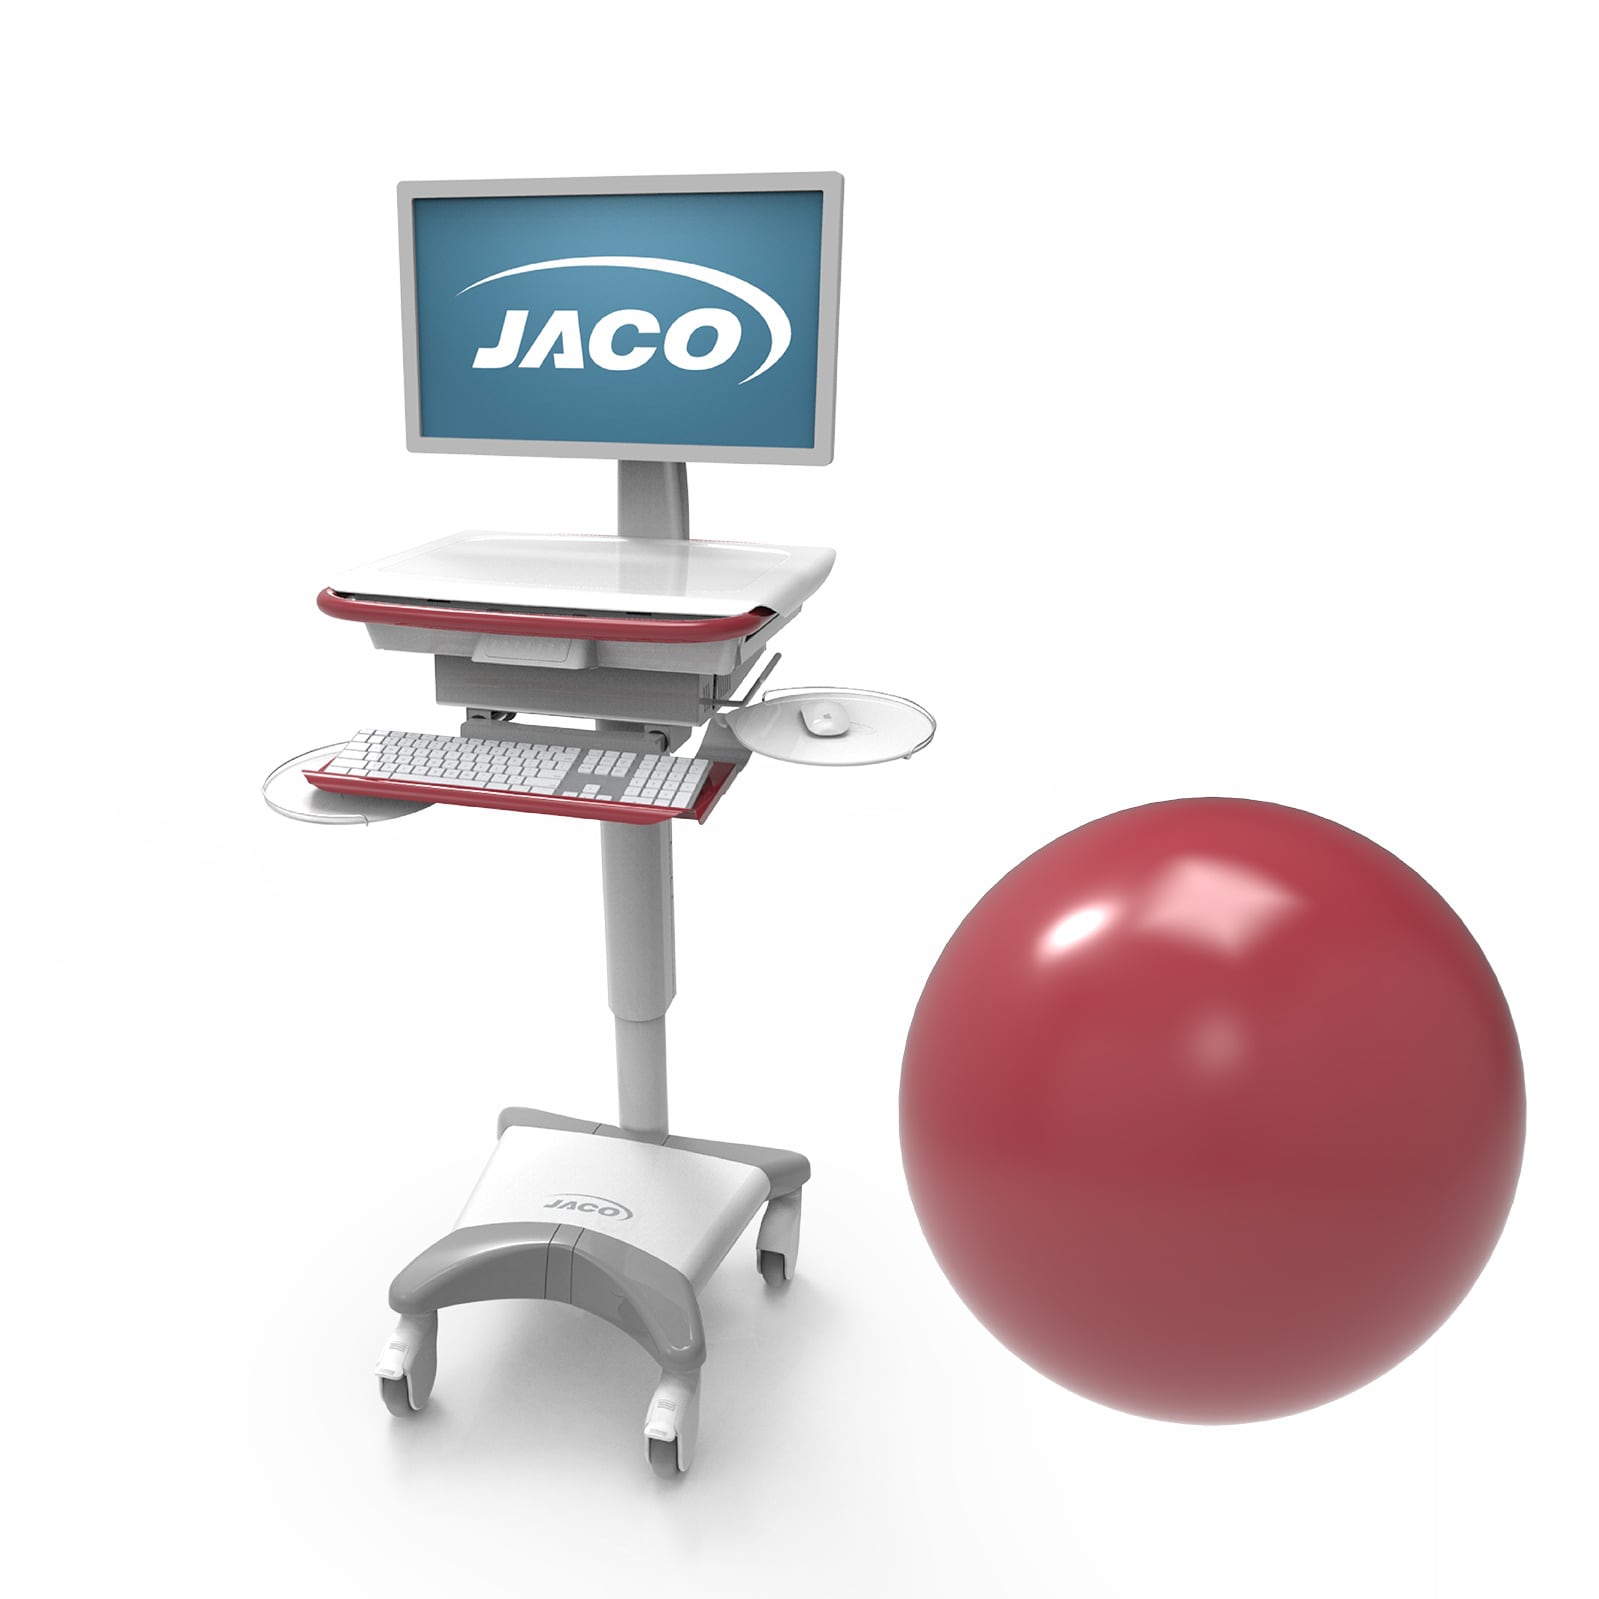 JACO Customization, Accent Color, Ruby Red, RAL3003, Antimicrobial Powder Coat, Smooth Gloss - setup fee